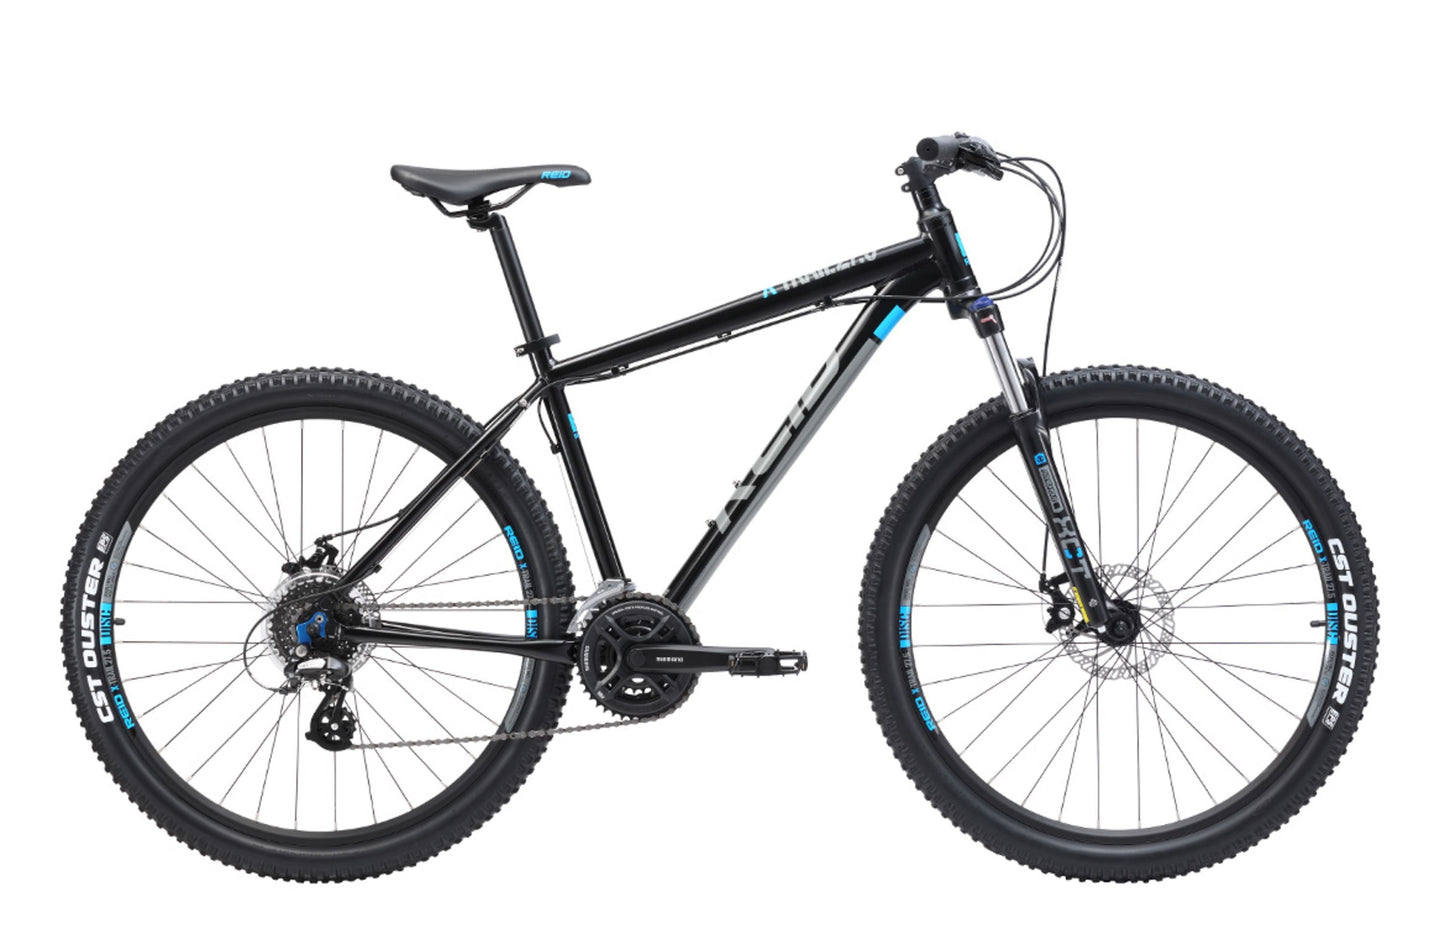 X-trail Mountain Bike in Gloss Black with Shimano 8-speed gearing from Reid Cycles Australia 